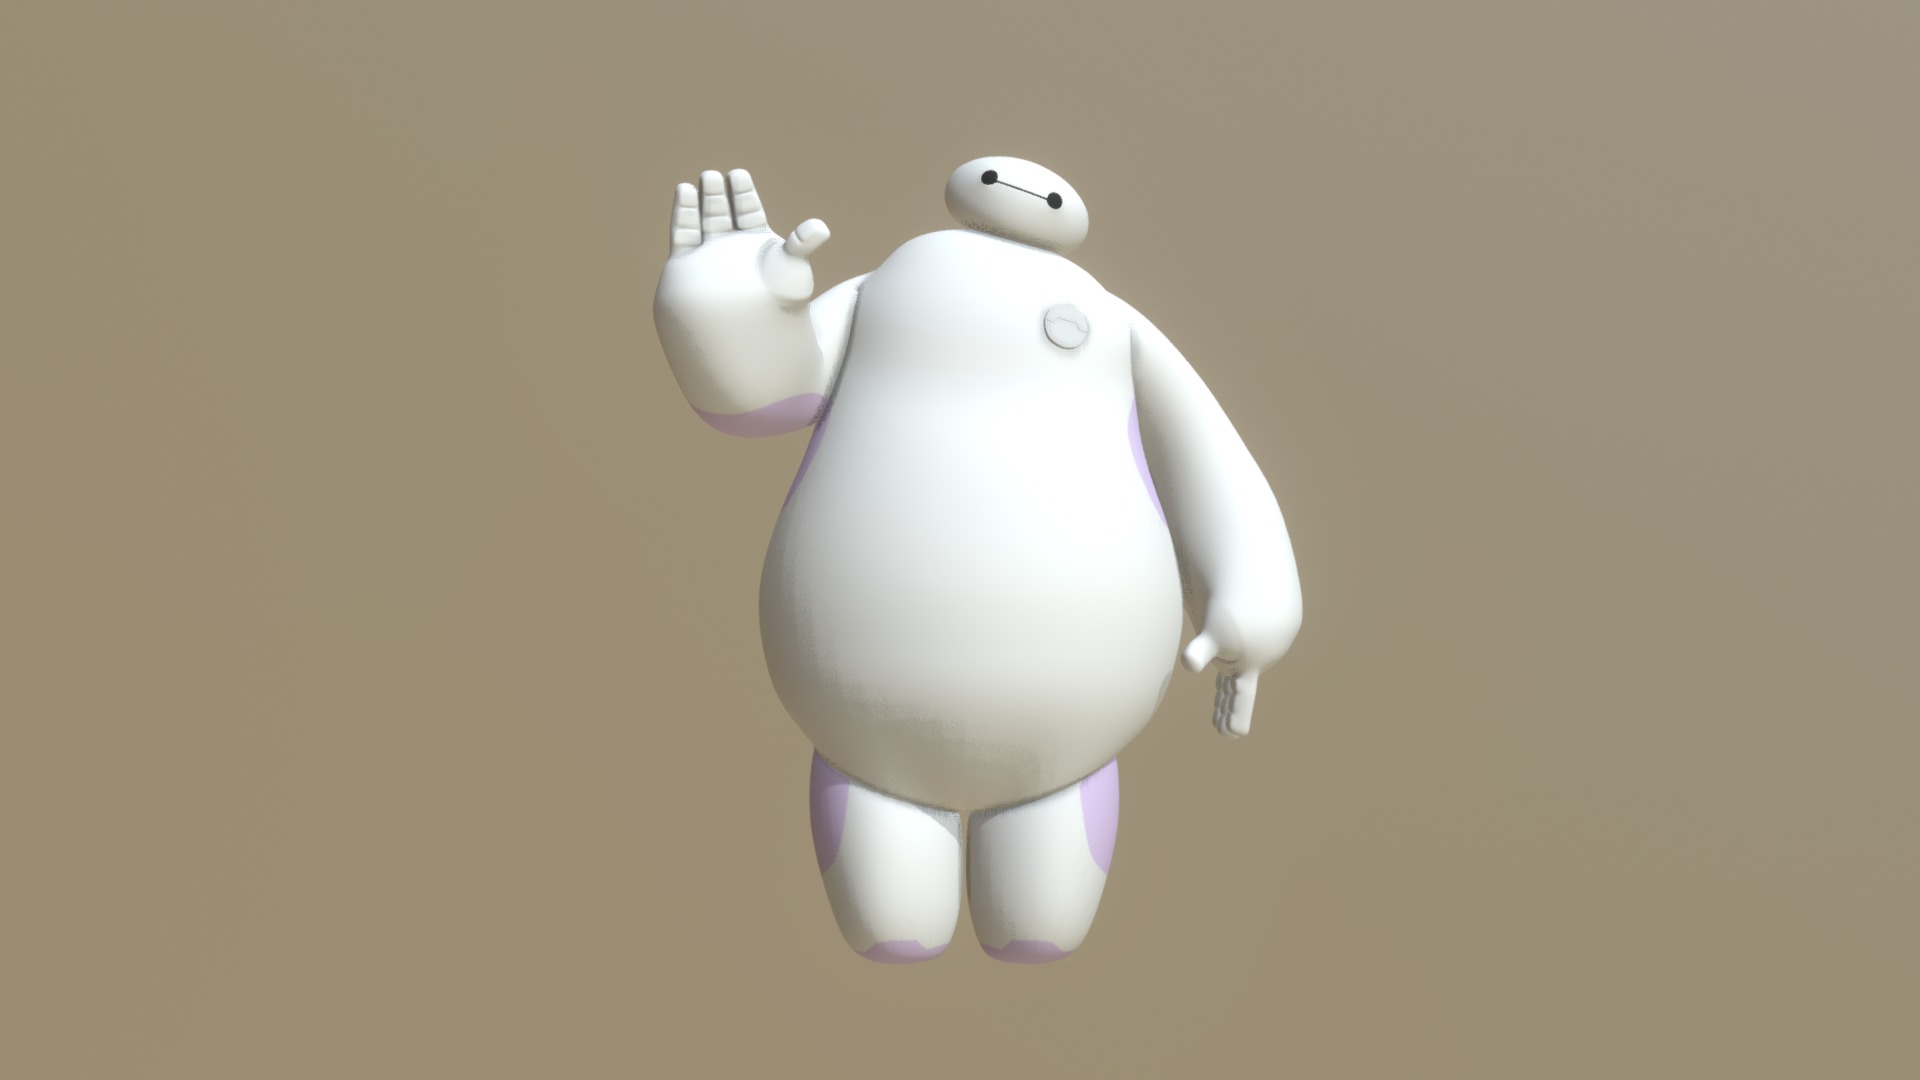 My take on recreating Baymax in Blender!

You can download the .blend file here:
https://www.blendswap.com/blends/view/76635 - Baymax (FAN ART) - 3D model by DoodleNotes 3d model